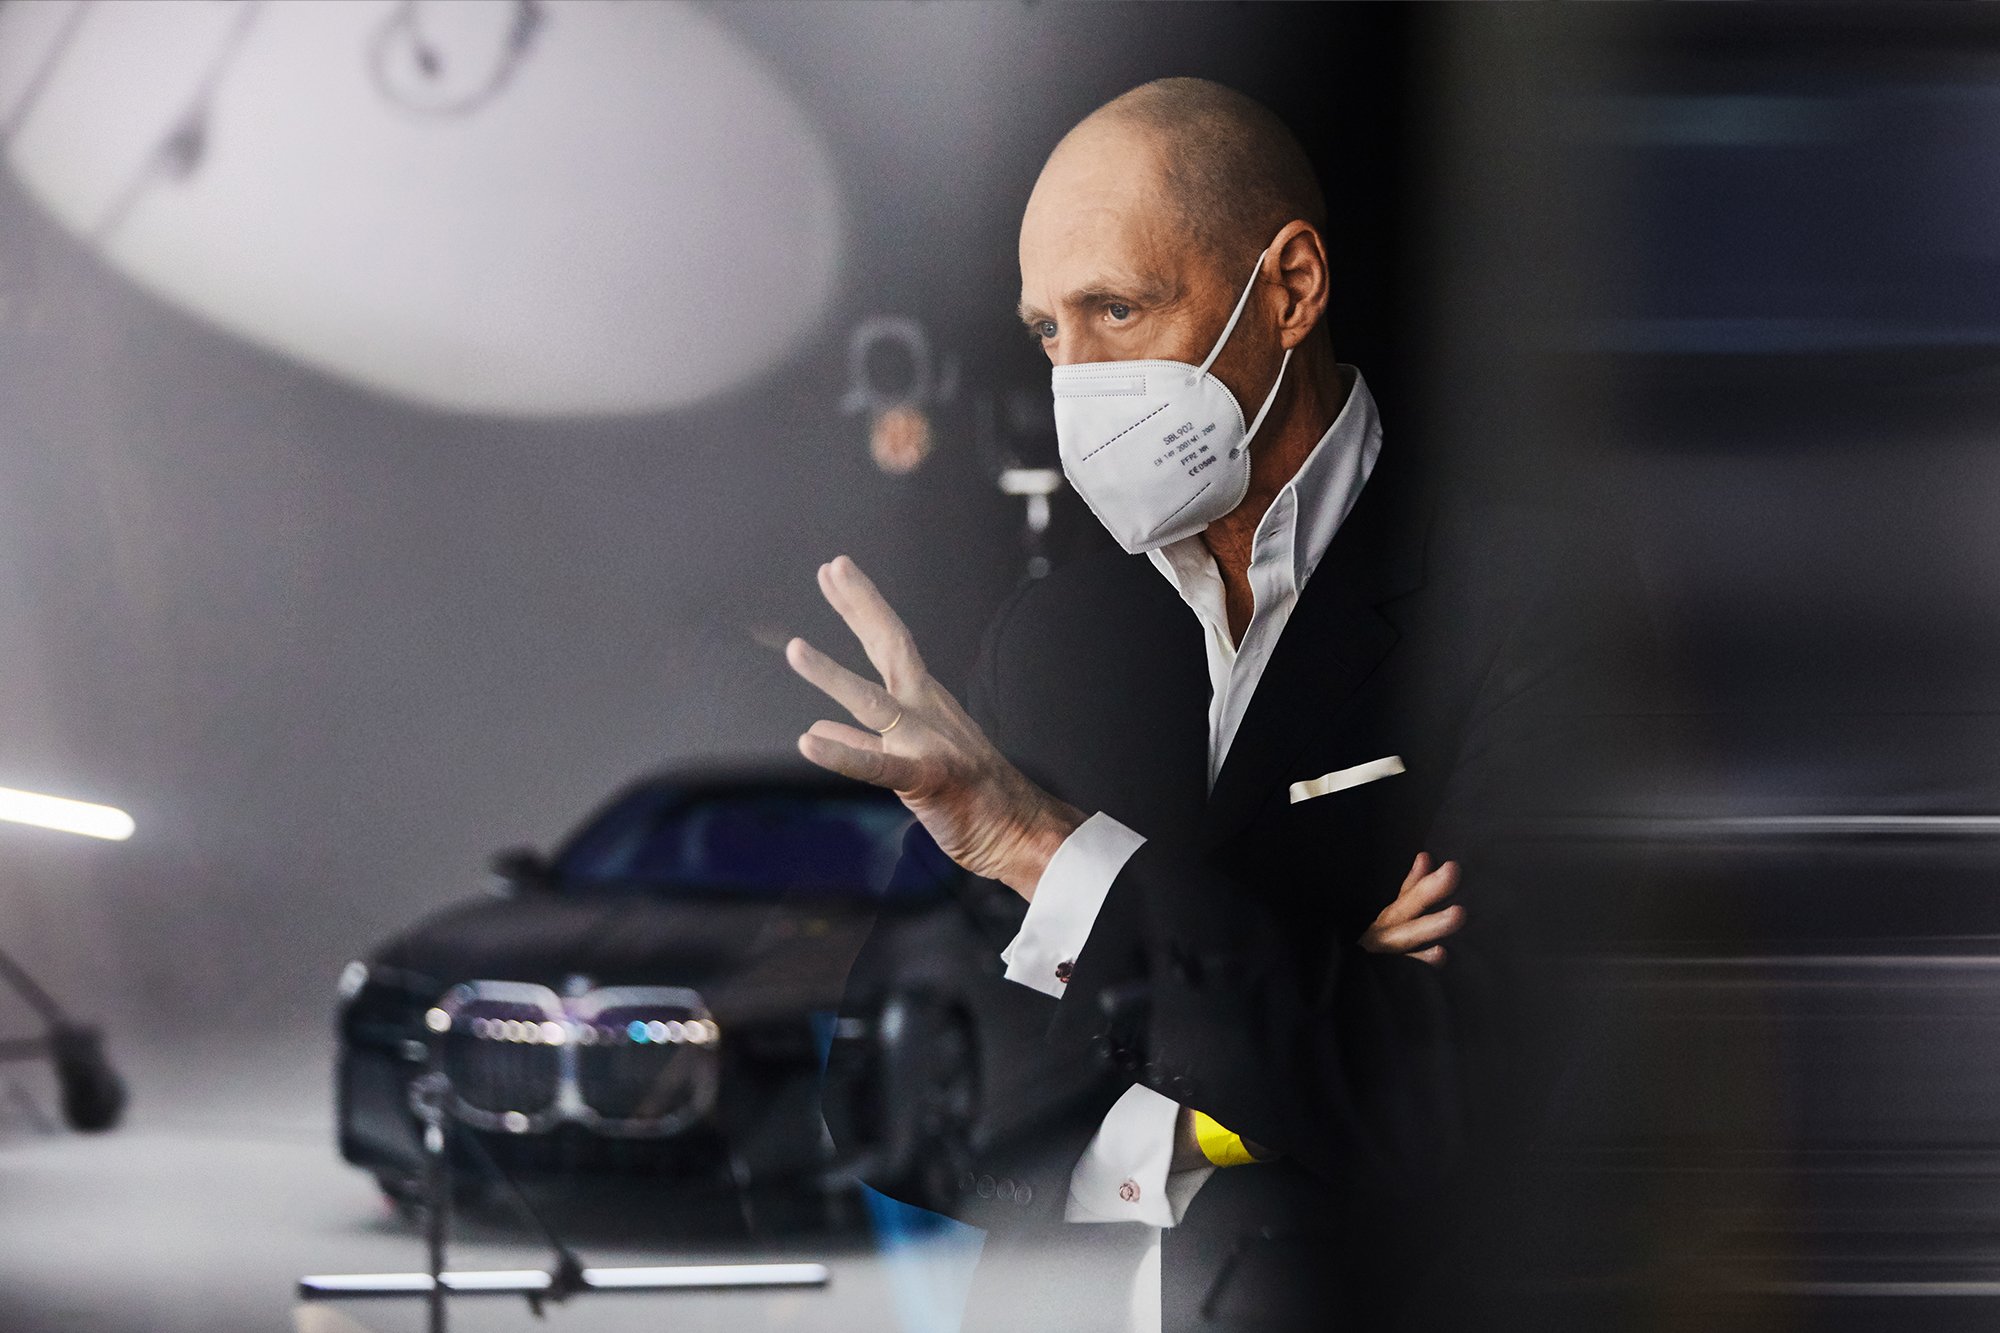 Nick Knight behind the scenes for the BMW i7 campaign